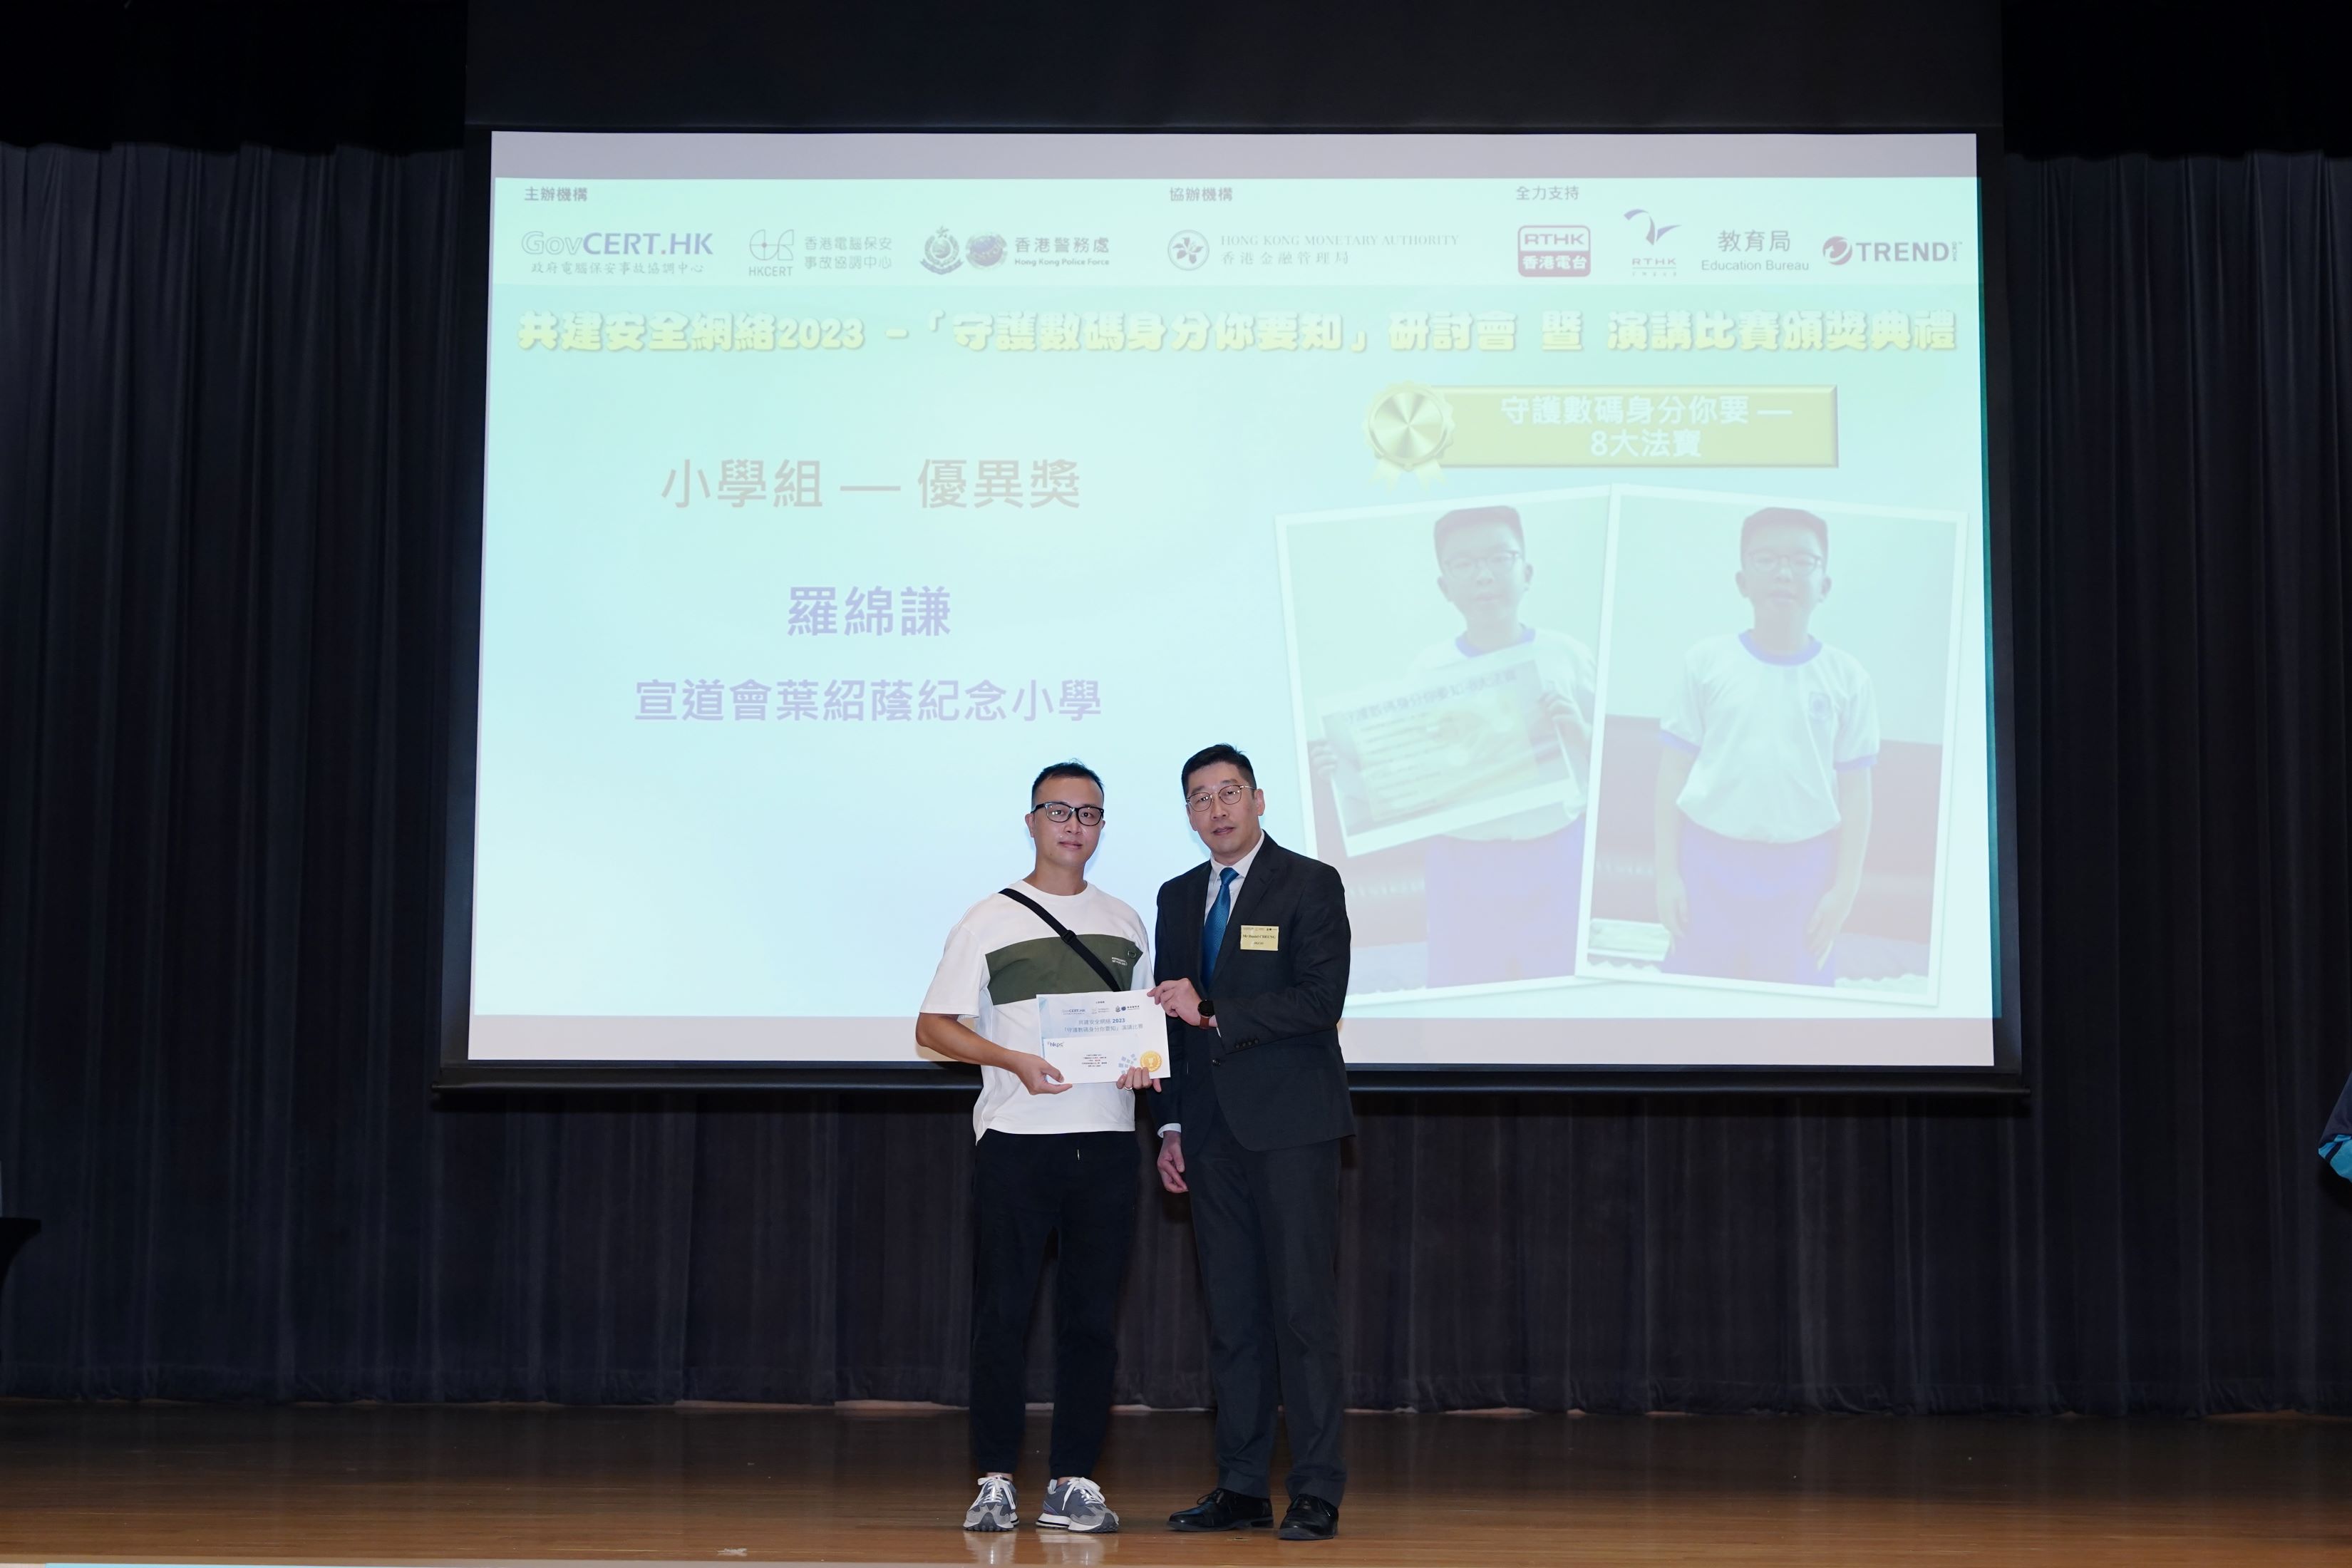 Merit prize winner of Primary School Category - Law Min Him (Christian Alliance S.Y. Yeh Memorial Primary School)(award received by authorised representative)